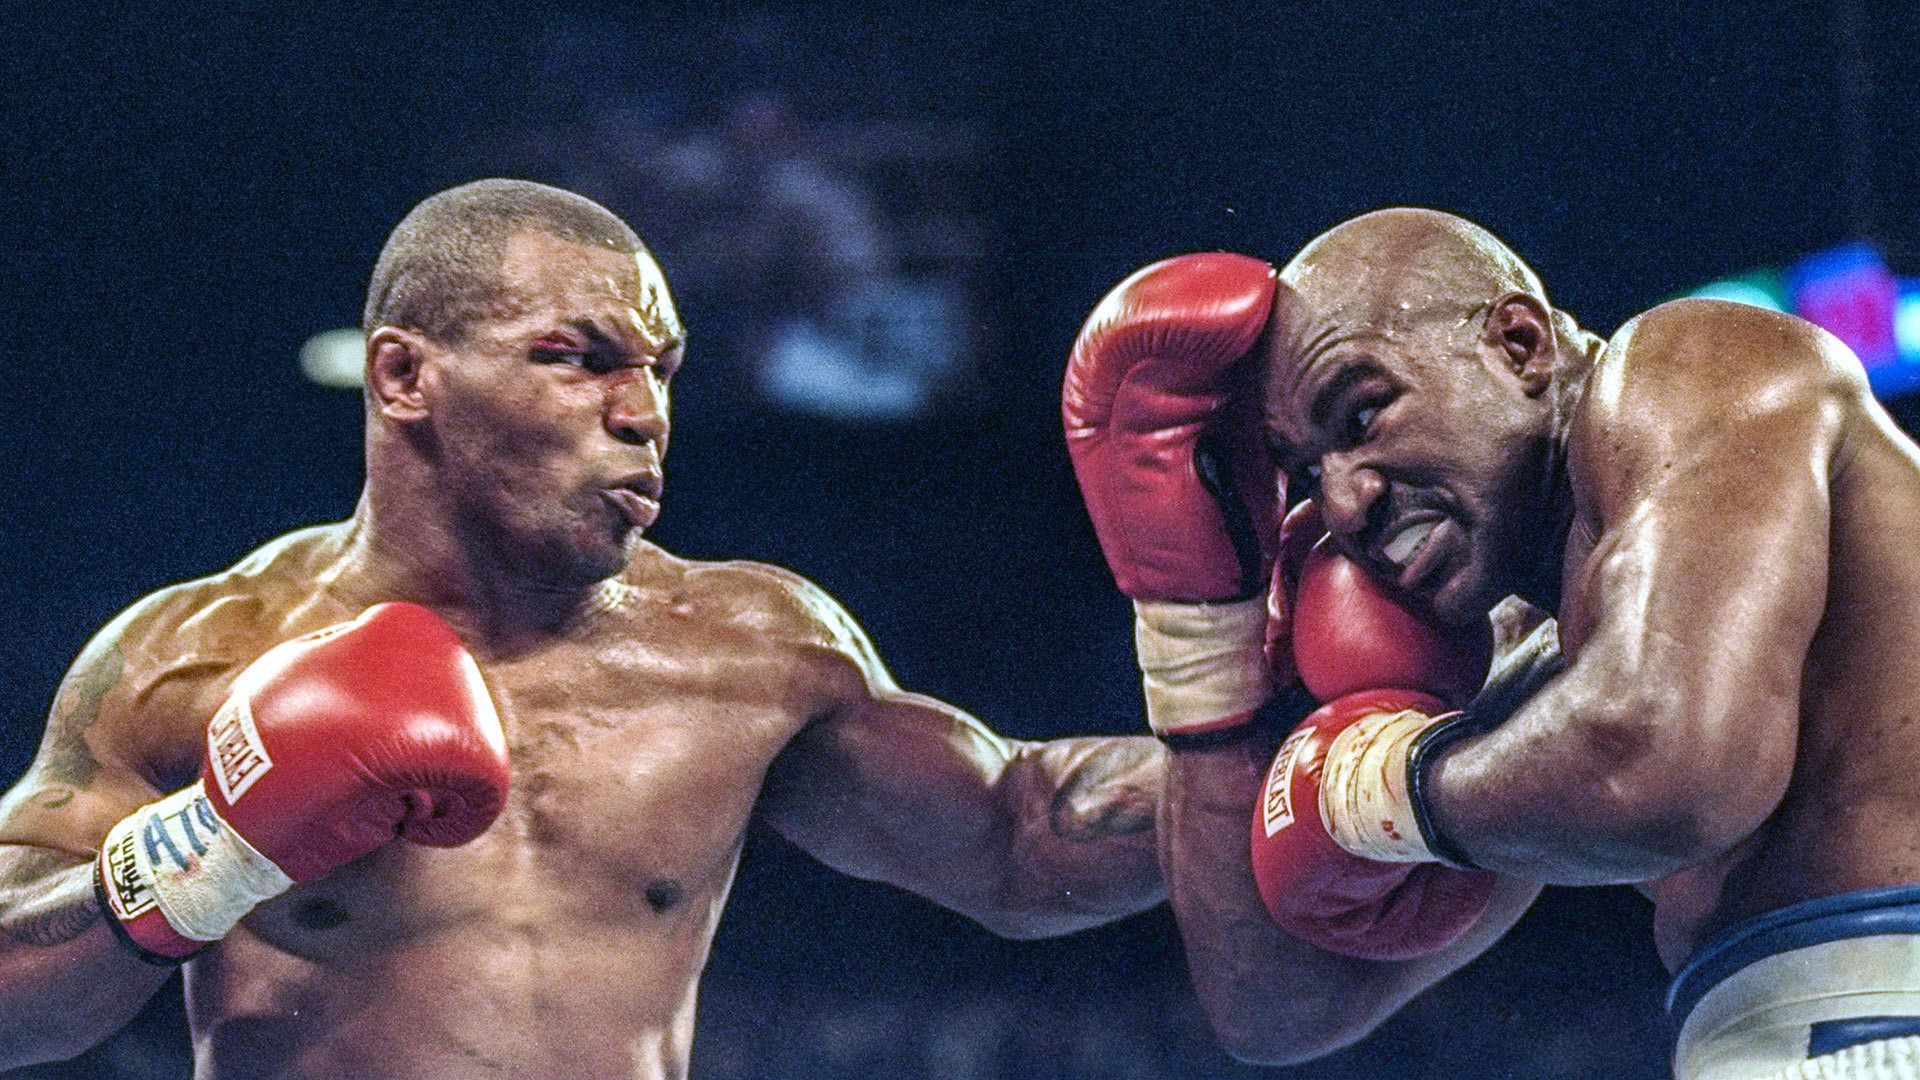 Mike Tyson Wallpapers APK for Android Download